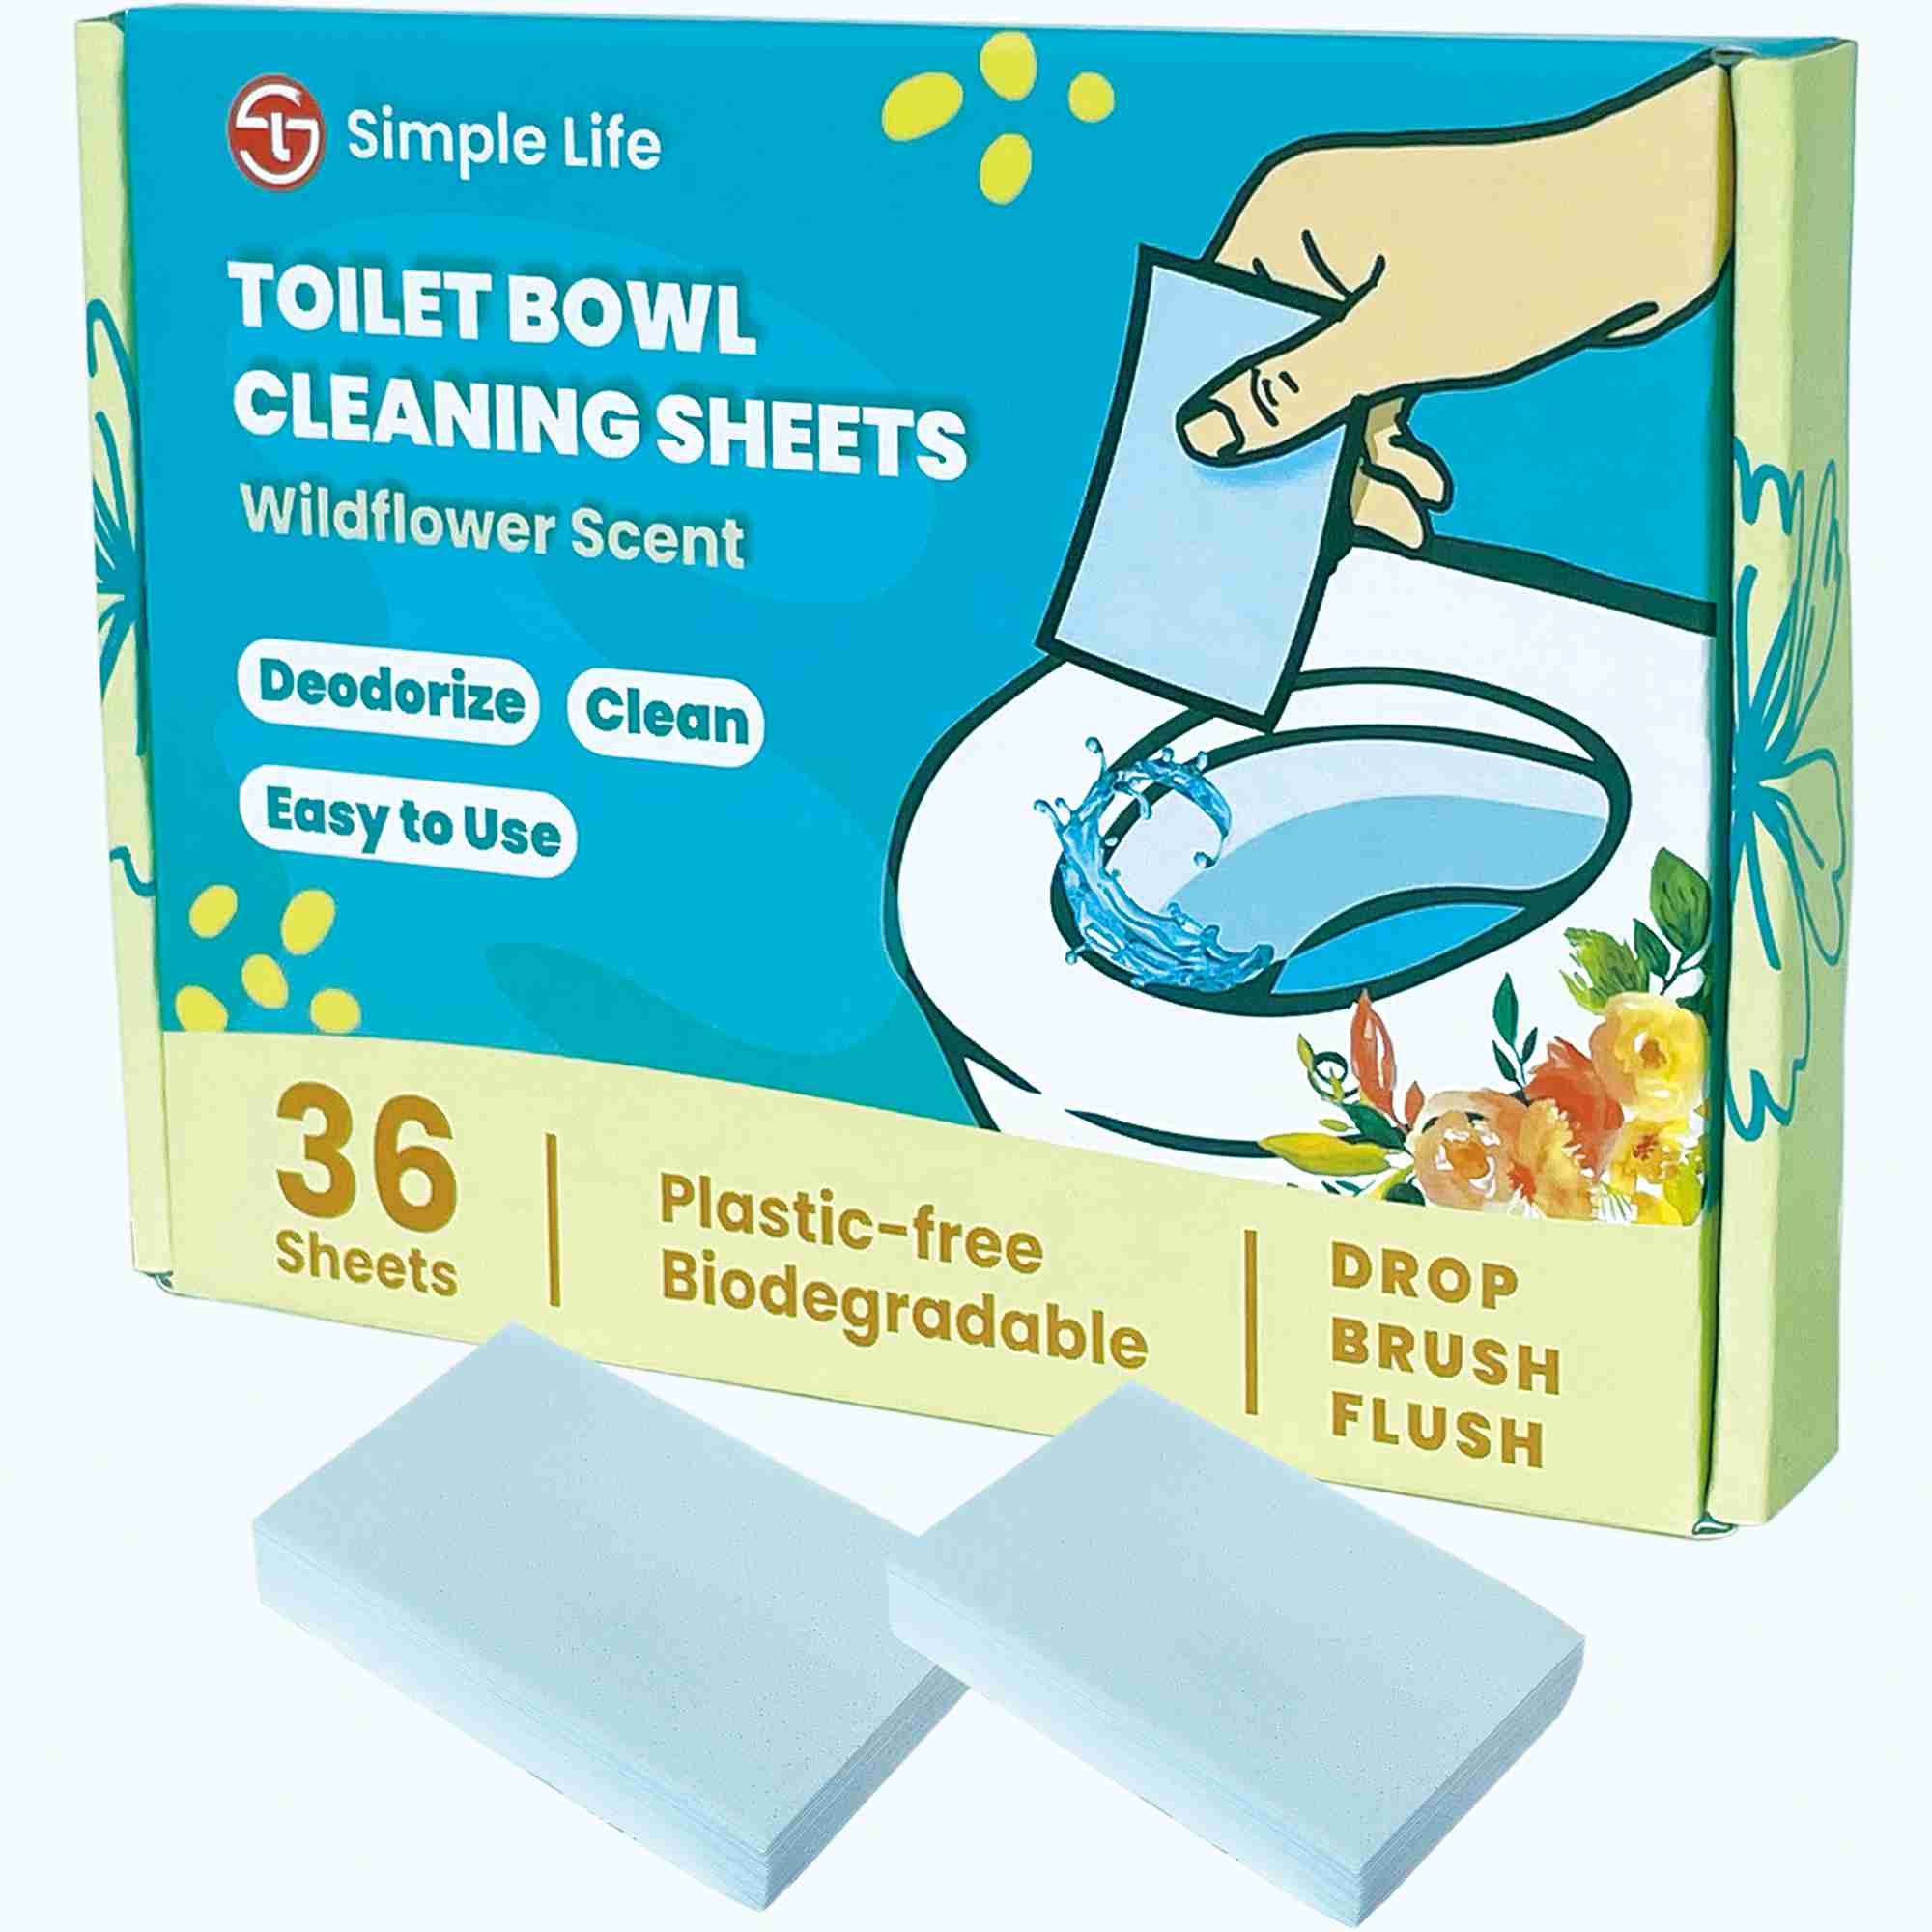 toilet-bowl-cleaner-sheets with cash back rebate